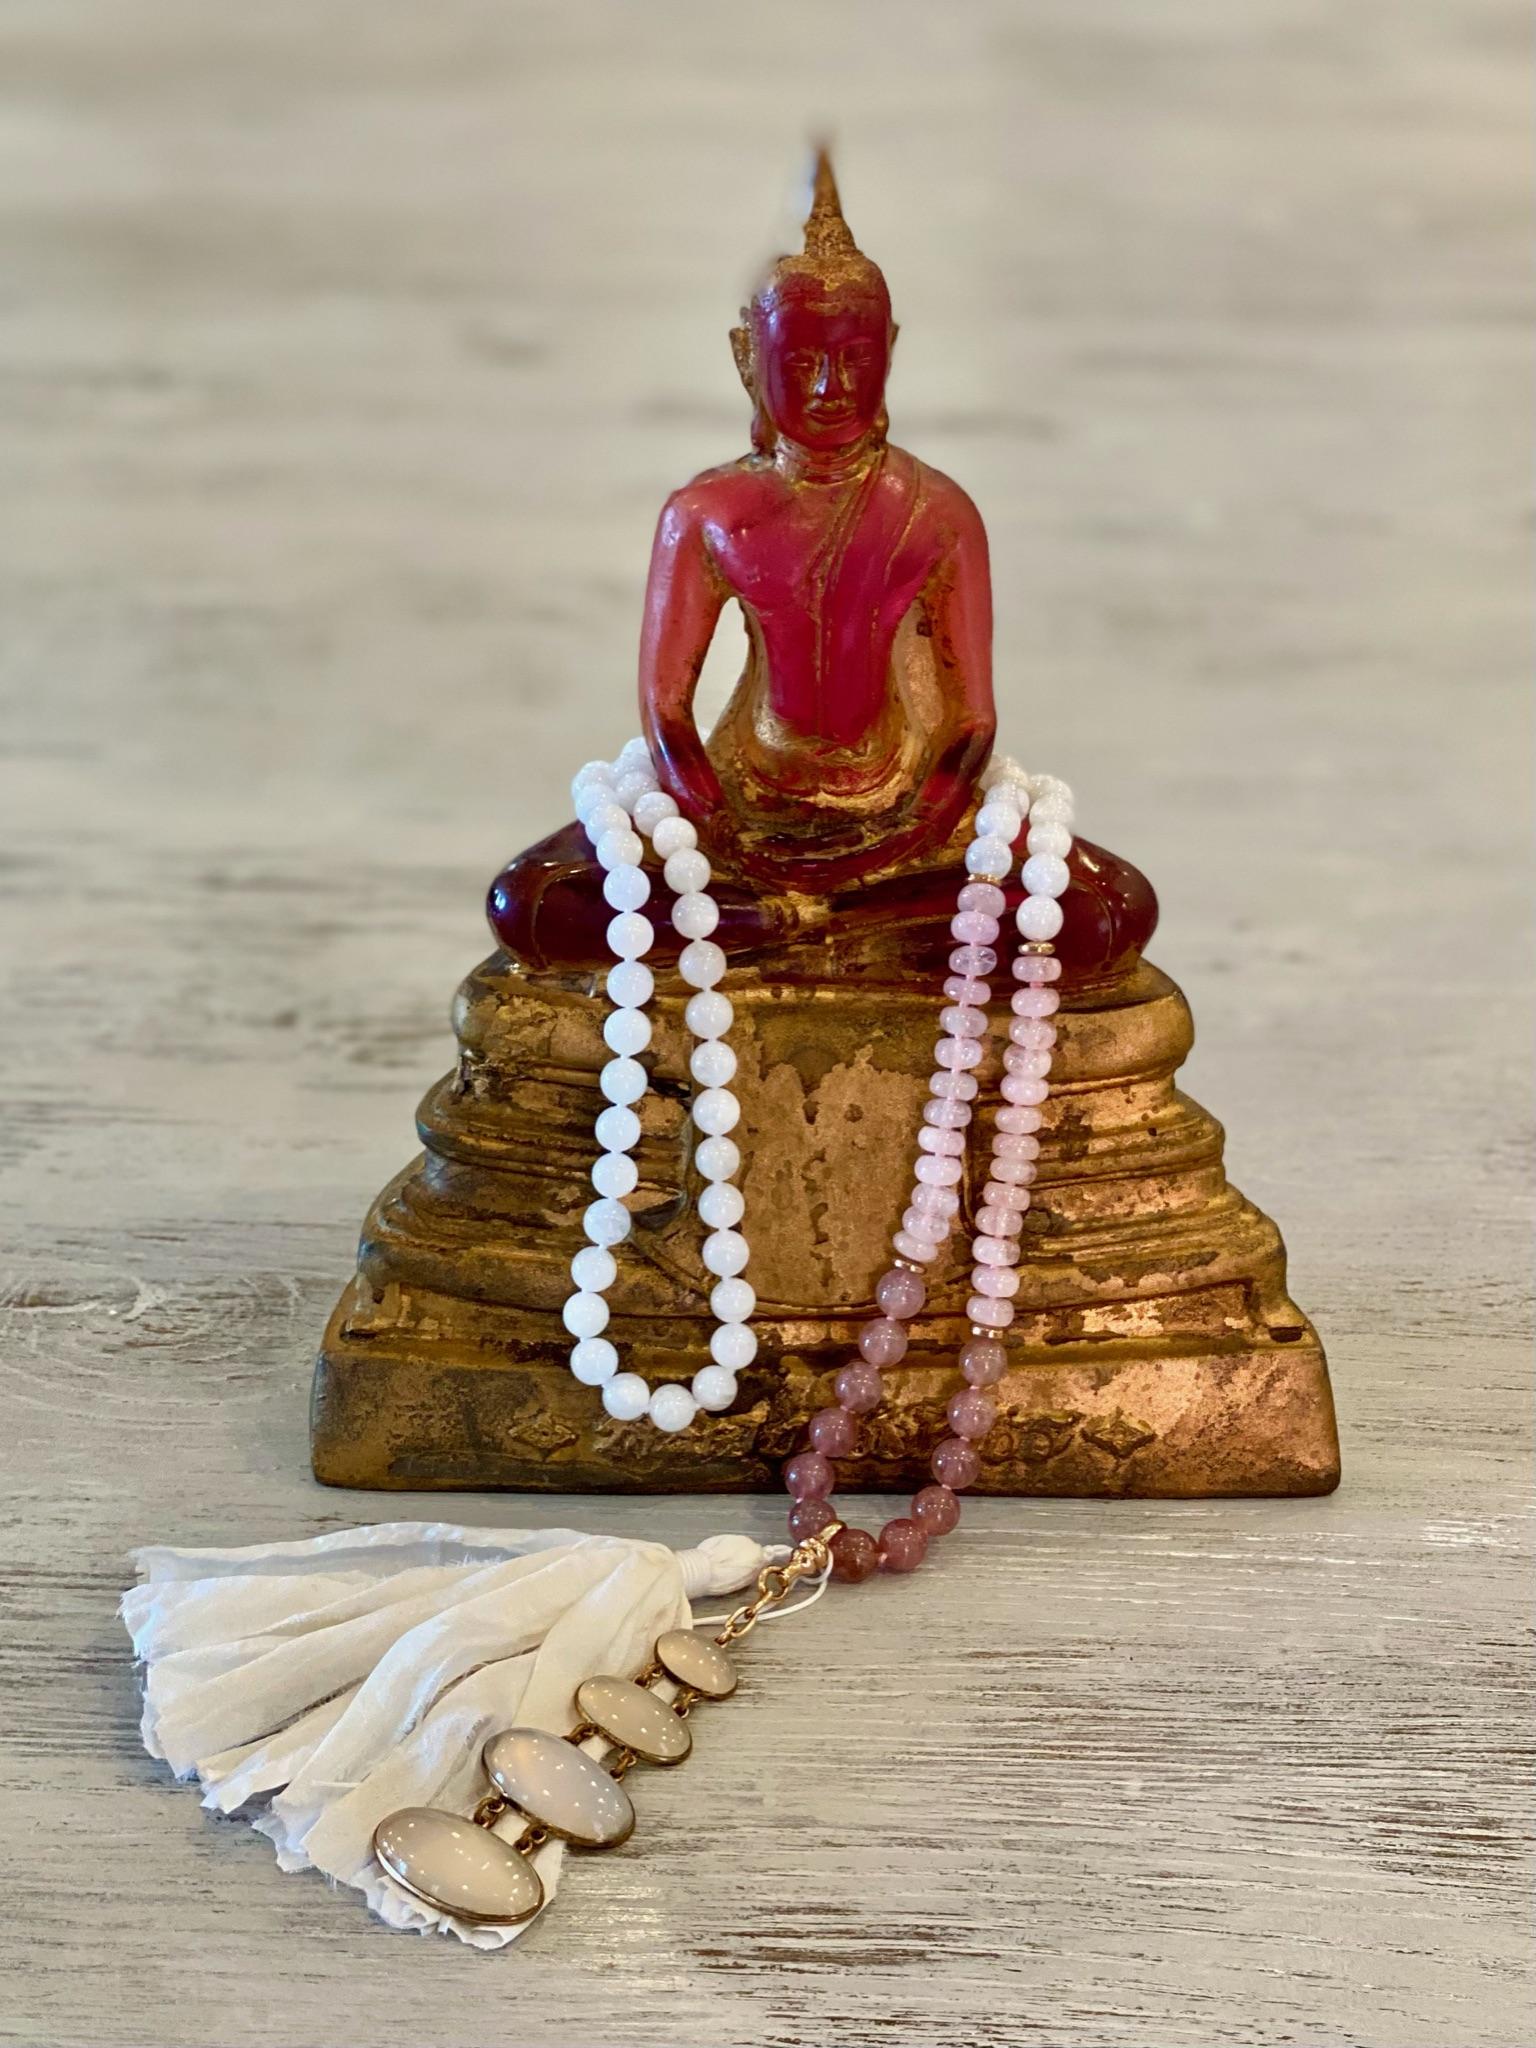 The only place you will find Fine Jewelry Mala Necklaces, used for prayer and meditation practices. Some people even call them Yoga Necklaces to connote a lifestyle of intentional living. Kiersten Elizabeth uses all gemstone materials and